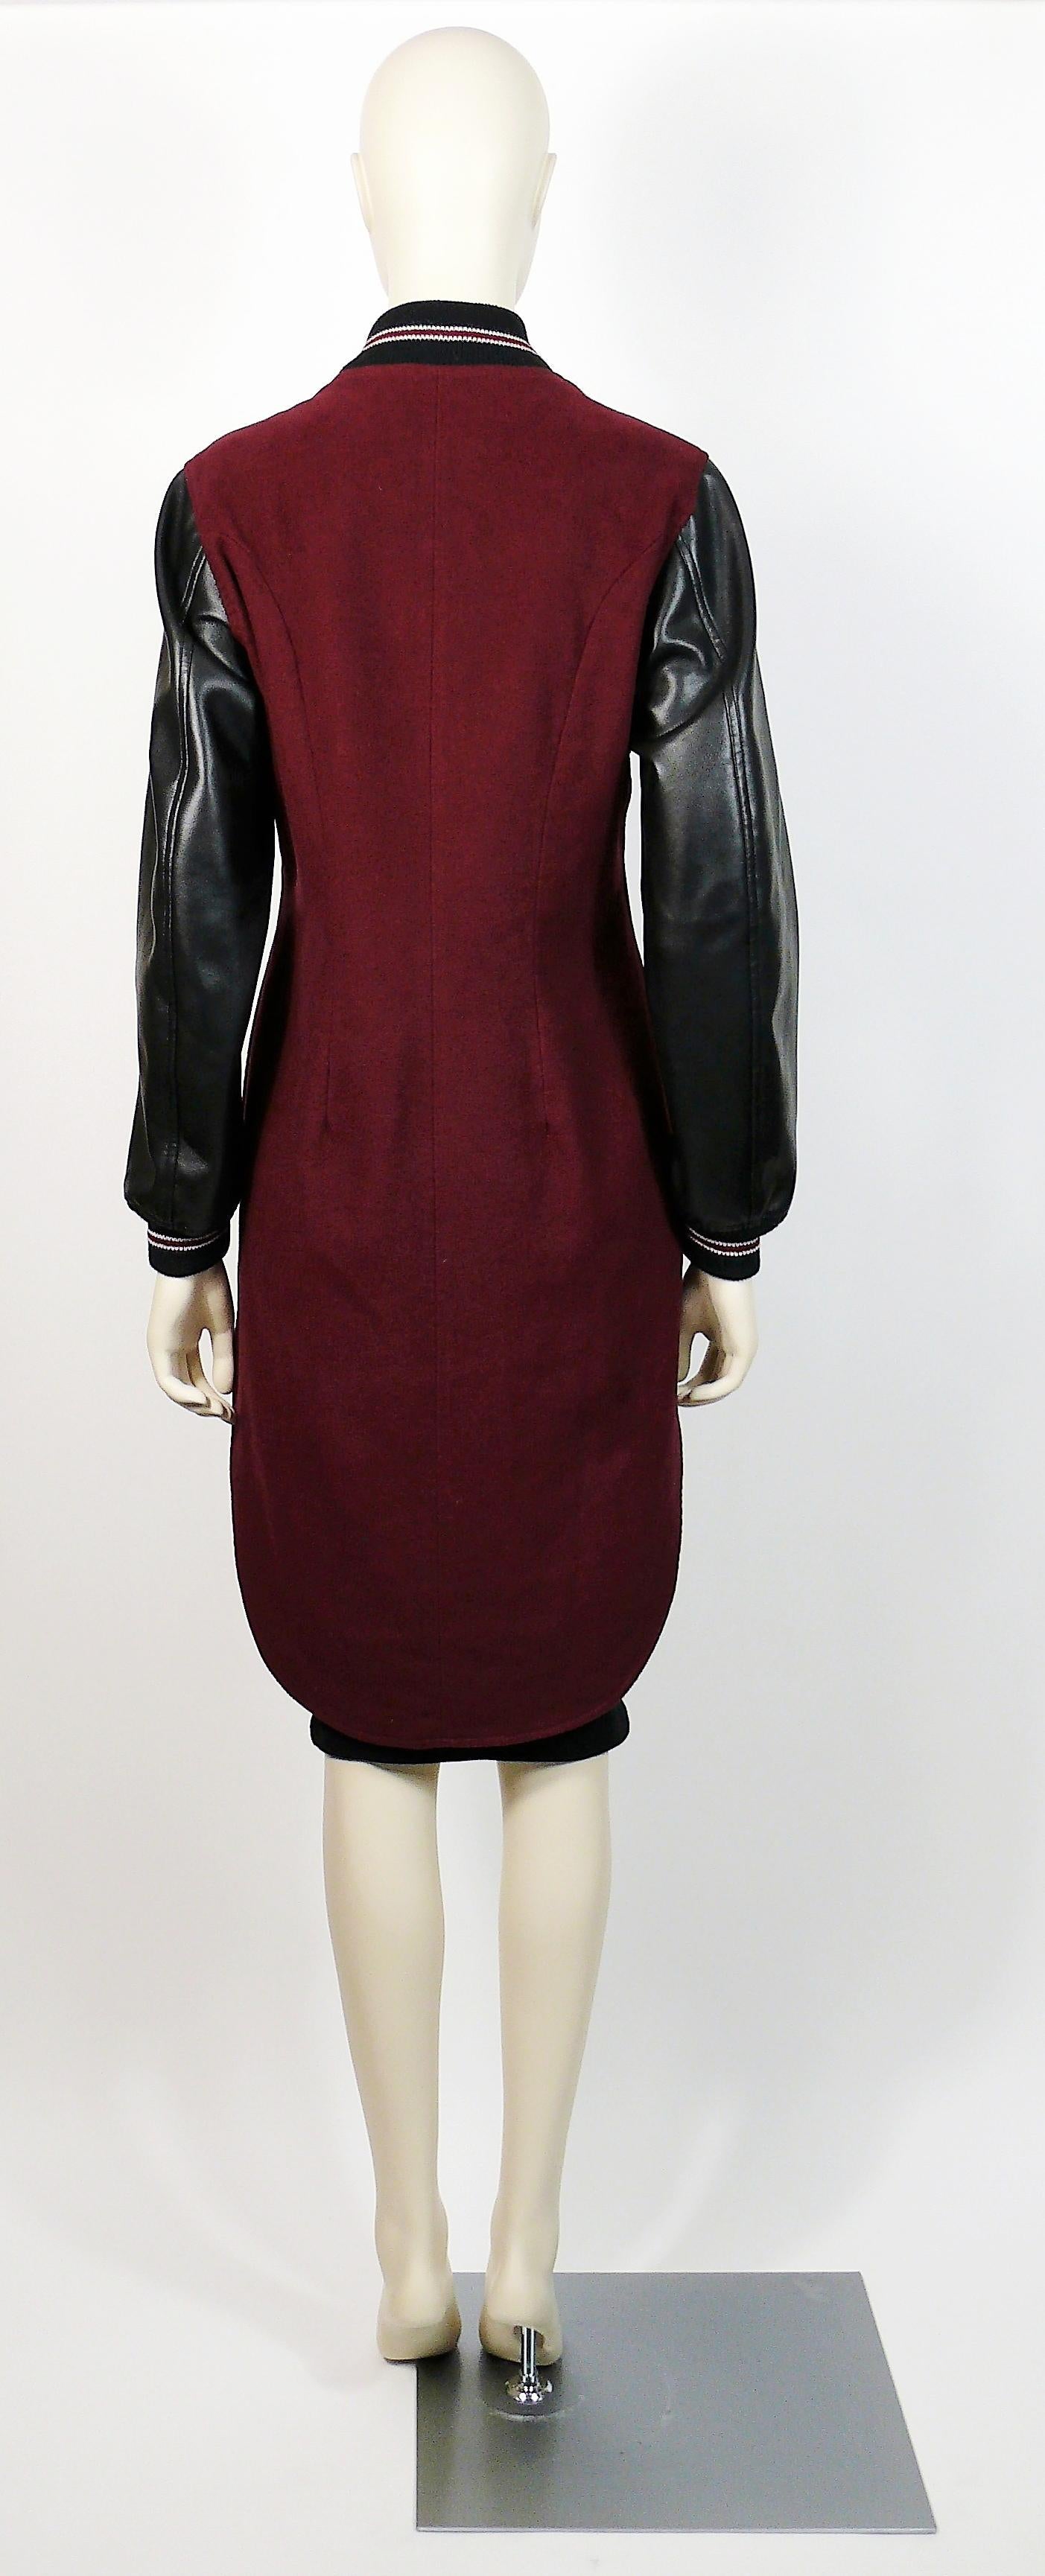 Jean Paul Gaultier Vintage Tailcoat Varsity Jacket In Good Condition For Sale In Nice, FR